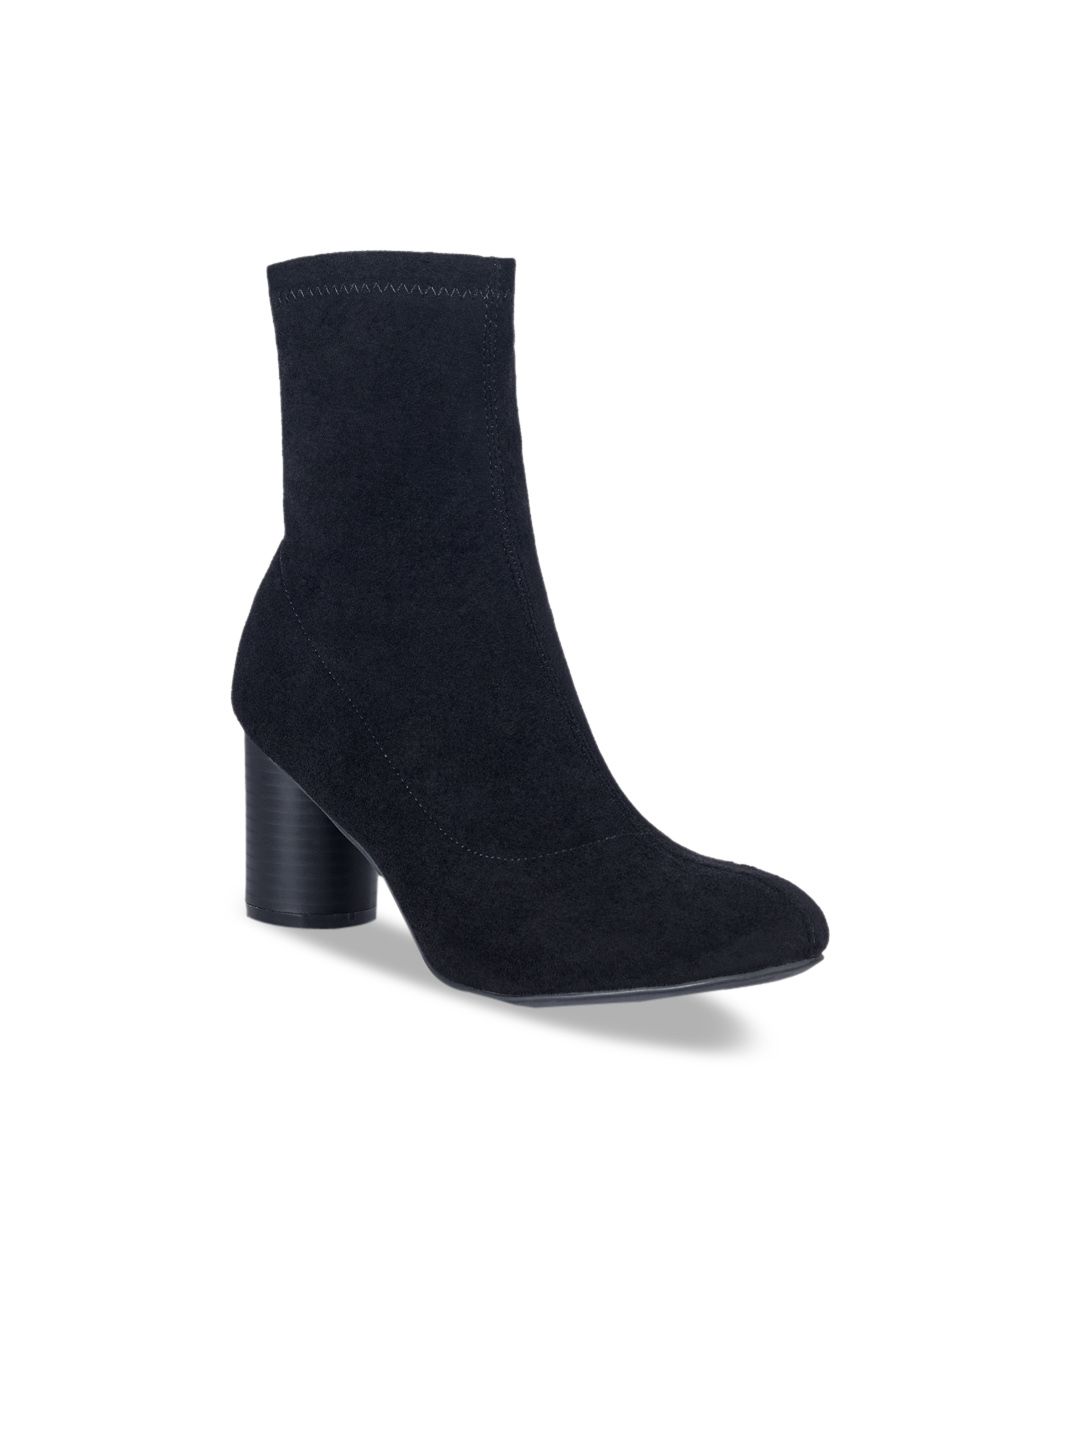 London Rag Women Black Suede Warmer Ankle Block Heeled Boots Price in India